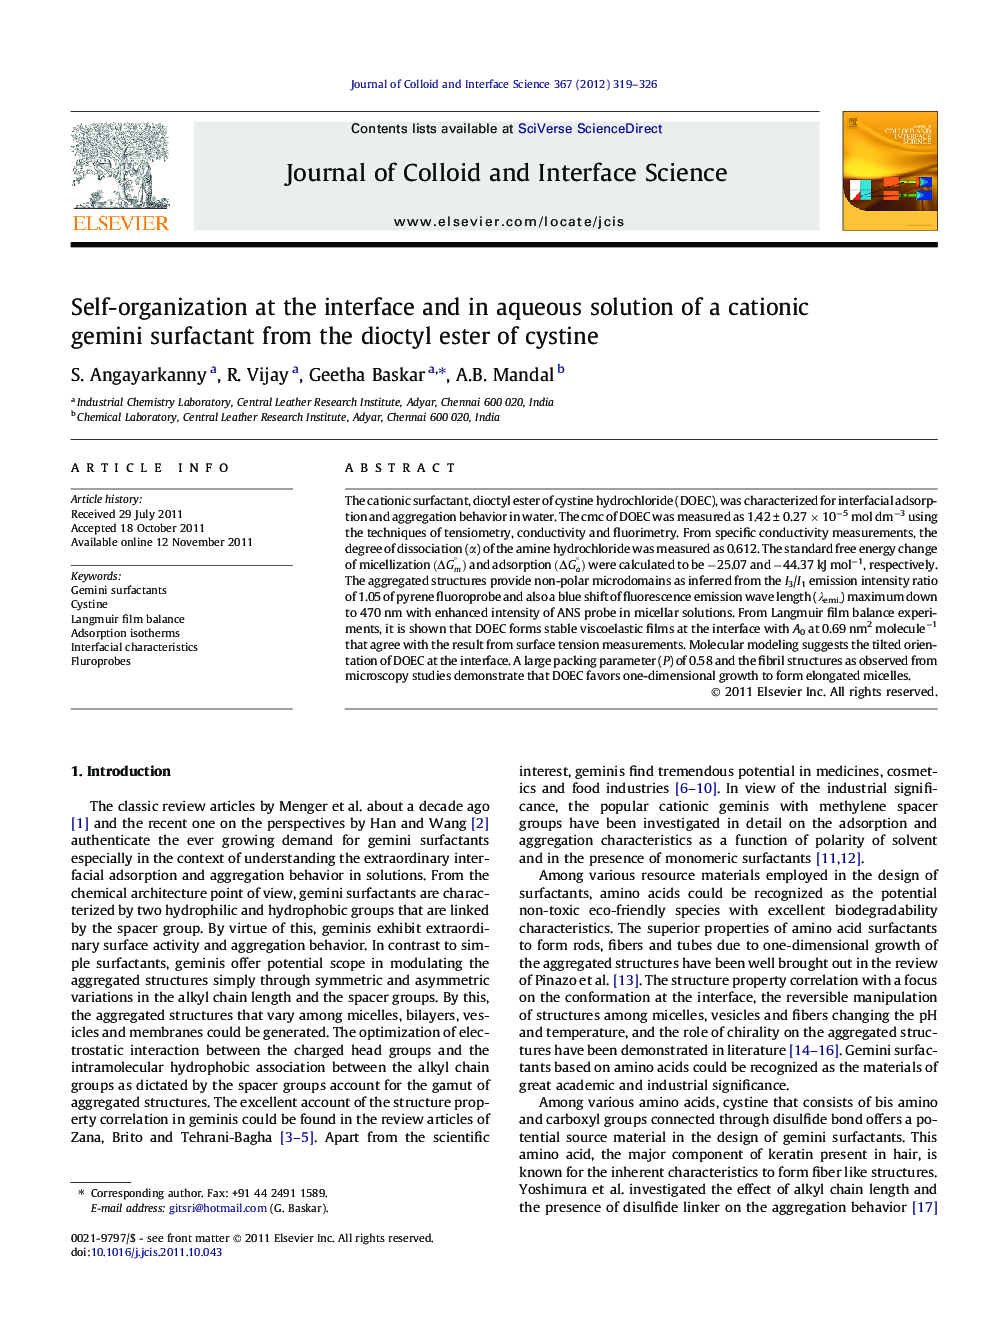 Self-organization at the interface and in aqueous solution of a cationic gemini surfactant from the dioctyl ester of cystine